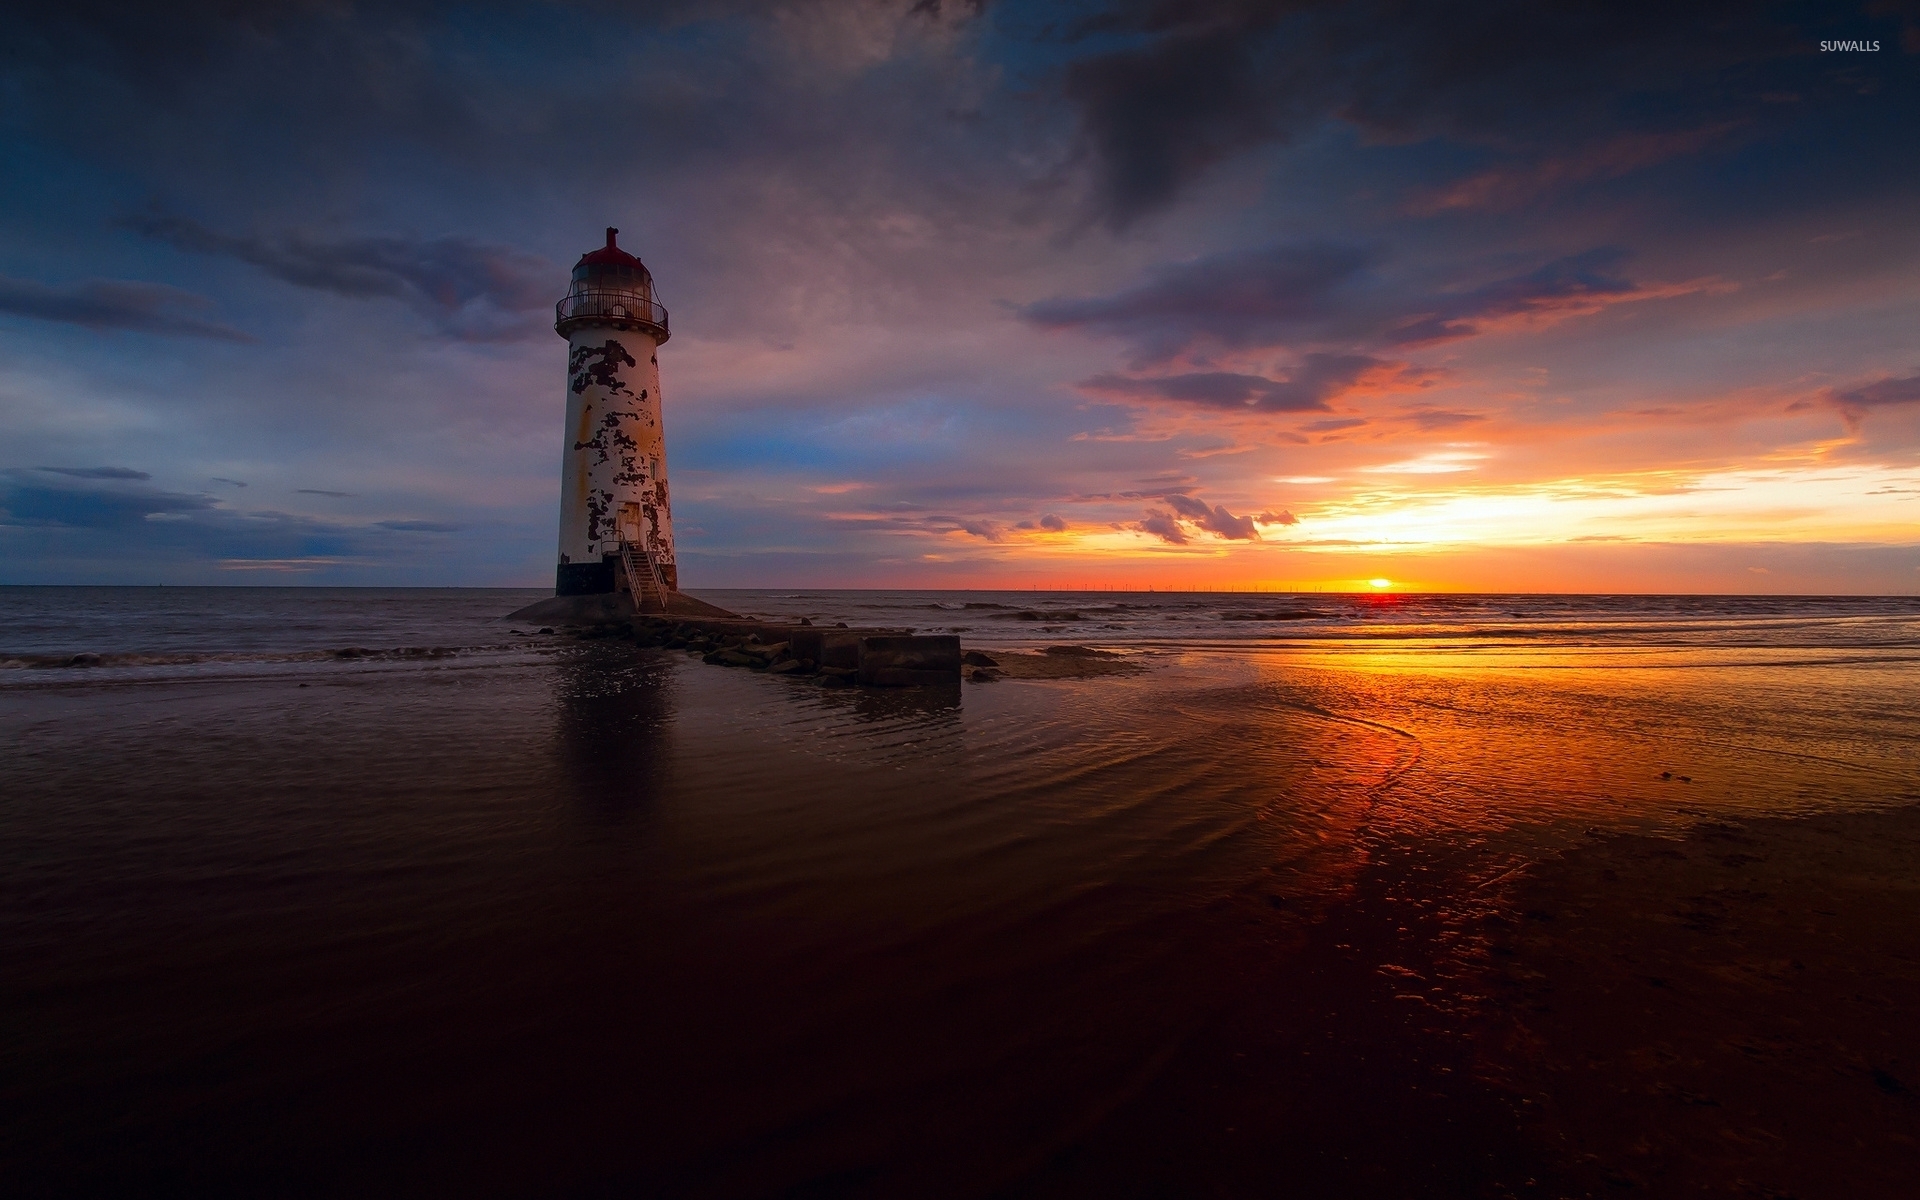 Abandoned lighthouse with a great view of the ocean sunset wallpaper